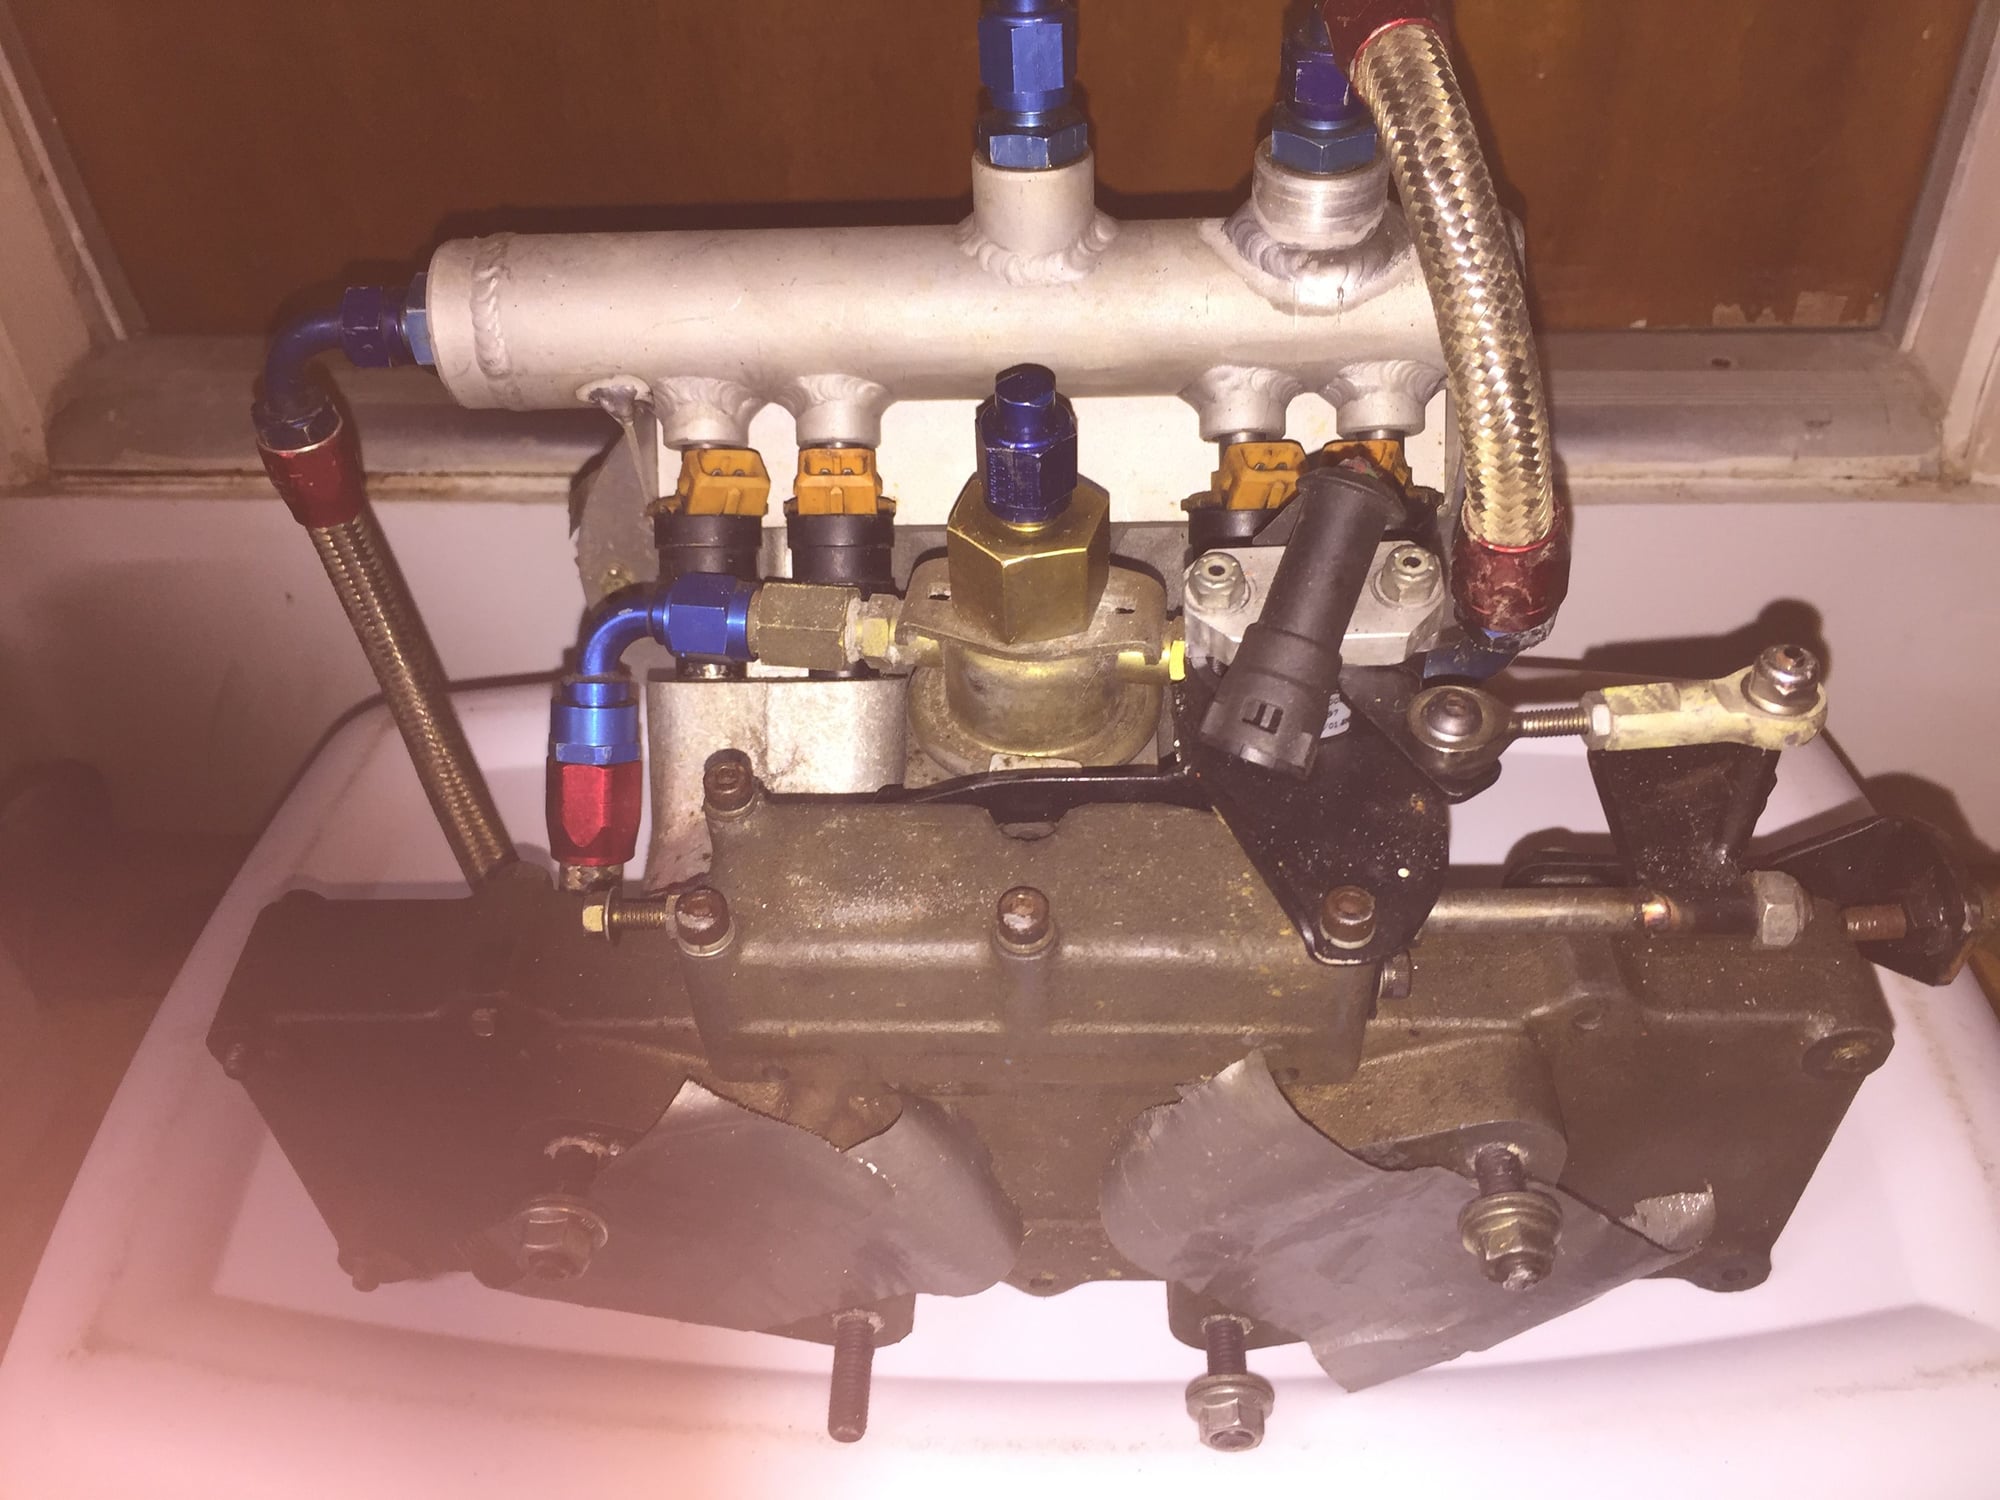 Engine - Intake/Fuel - Factory Slide Throttle Injection System - Used - 1984 to 1994 Mazda RX-7 - Fernandina Beach, FL 32034, United States